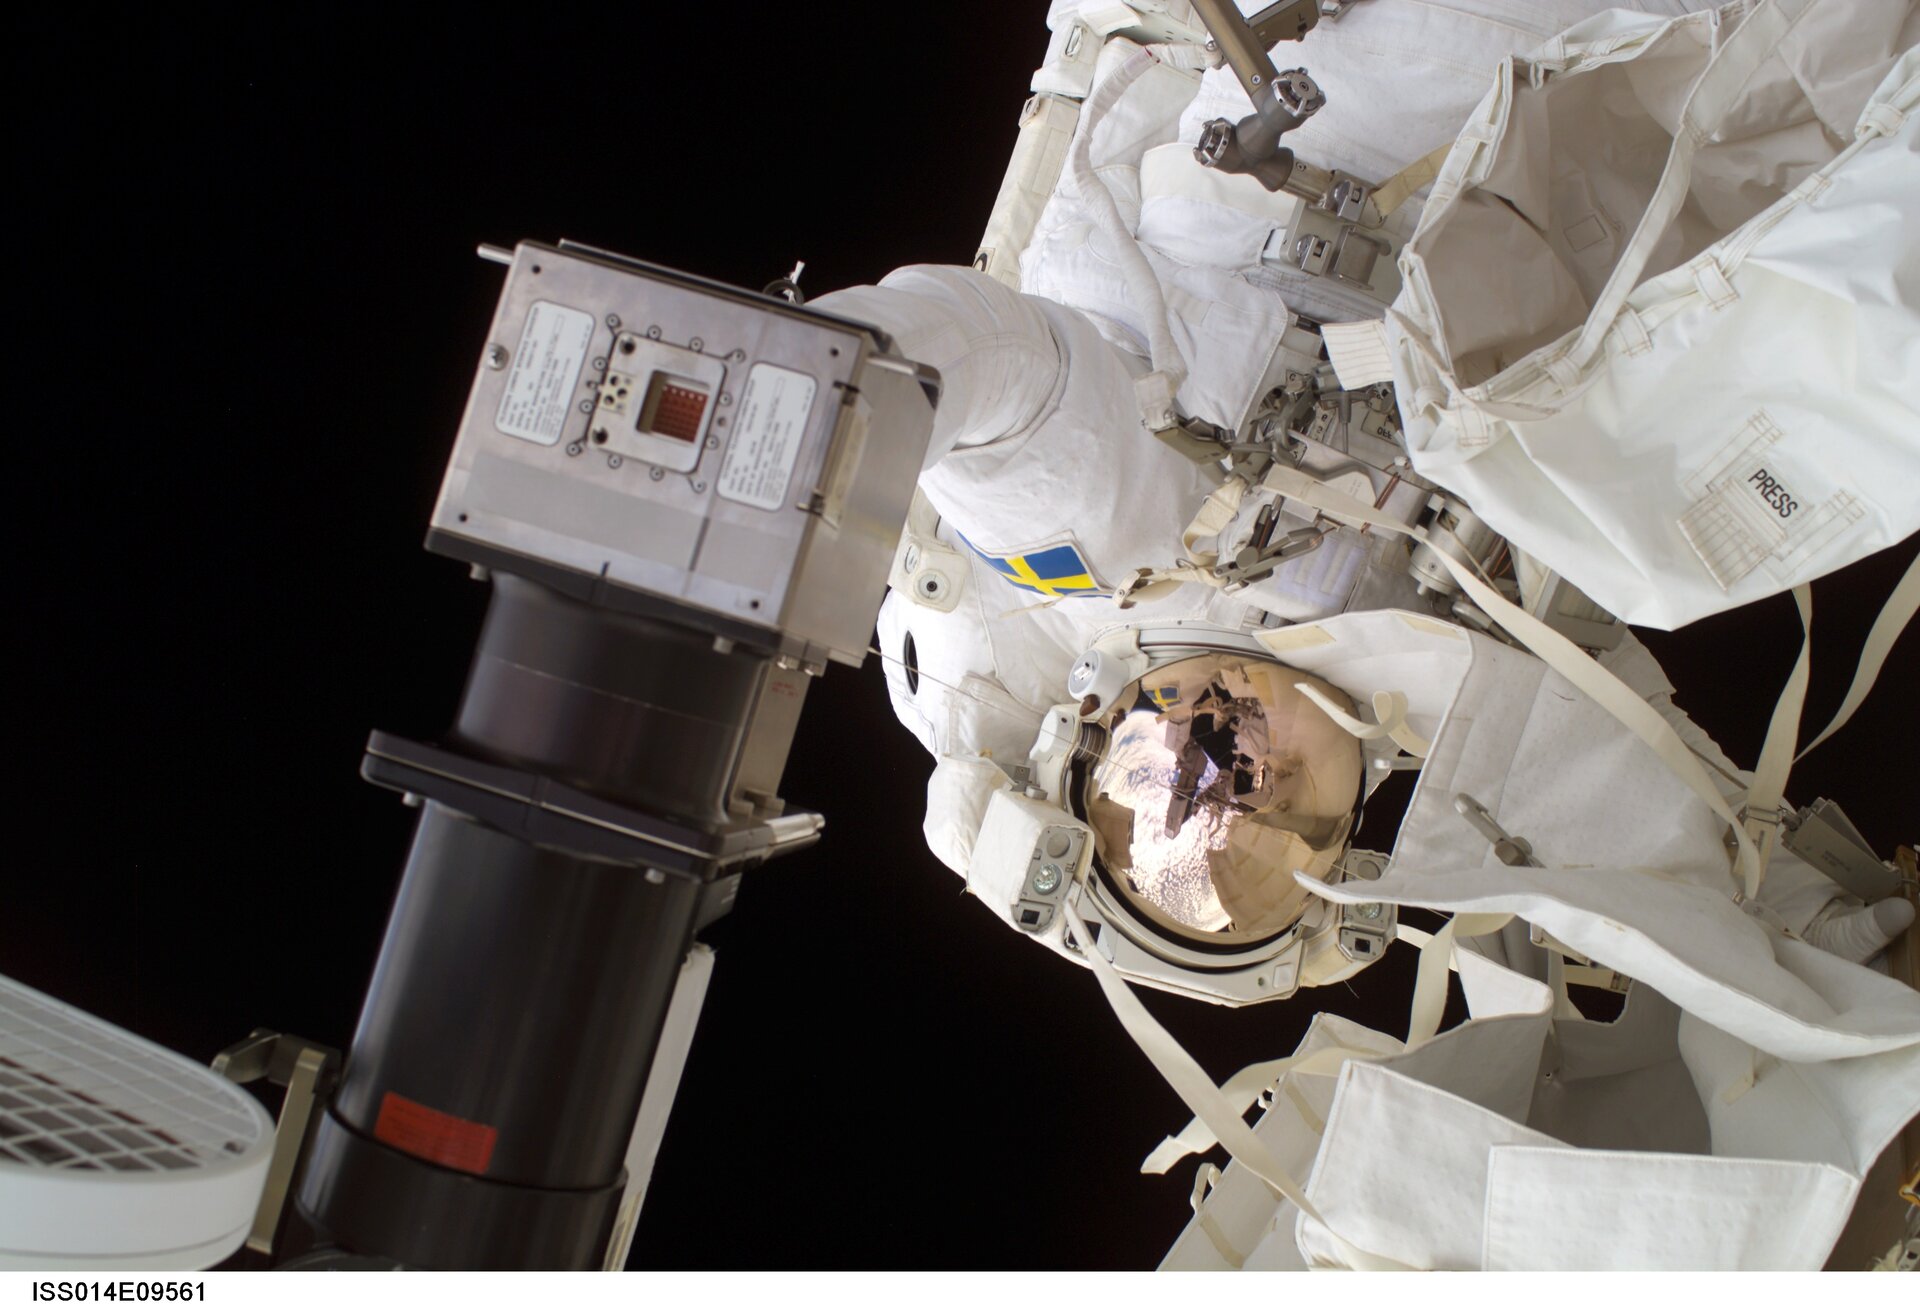 Astronaut Christer Fuglesang replaces a faulty TV camera on the exterior of the International Space Station